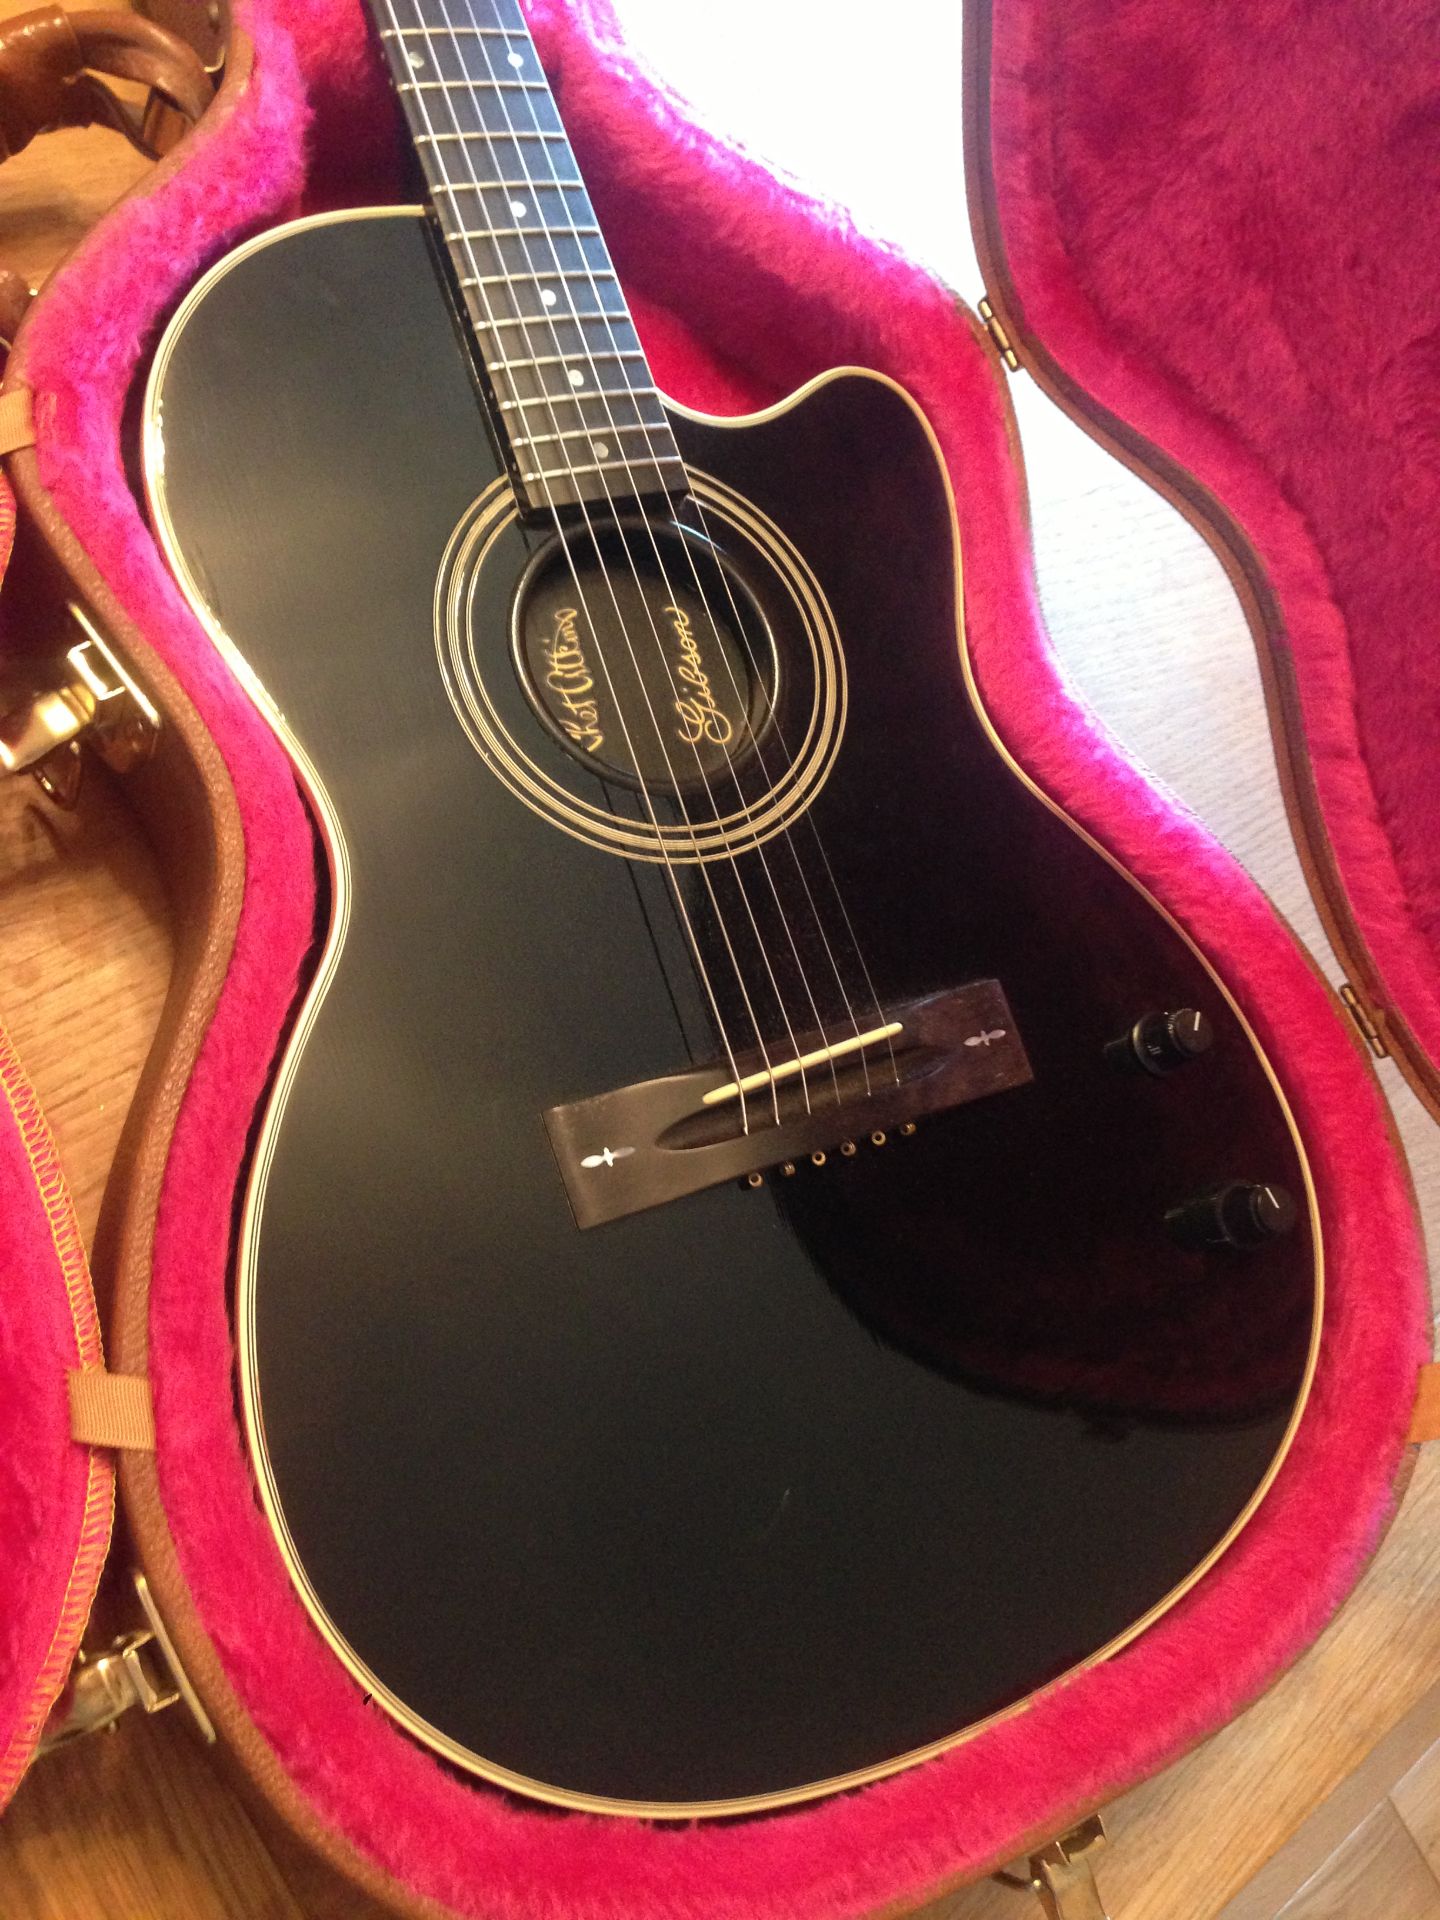 CHET ATKINS GIBSON ACOUSTIC ELECTRIC GUITAR WITH HARD CASE - Image 2 of 9